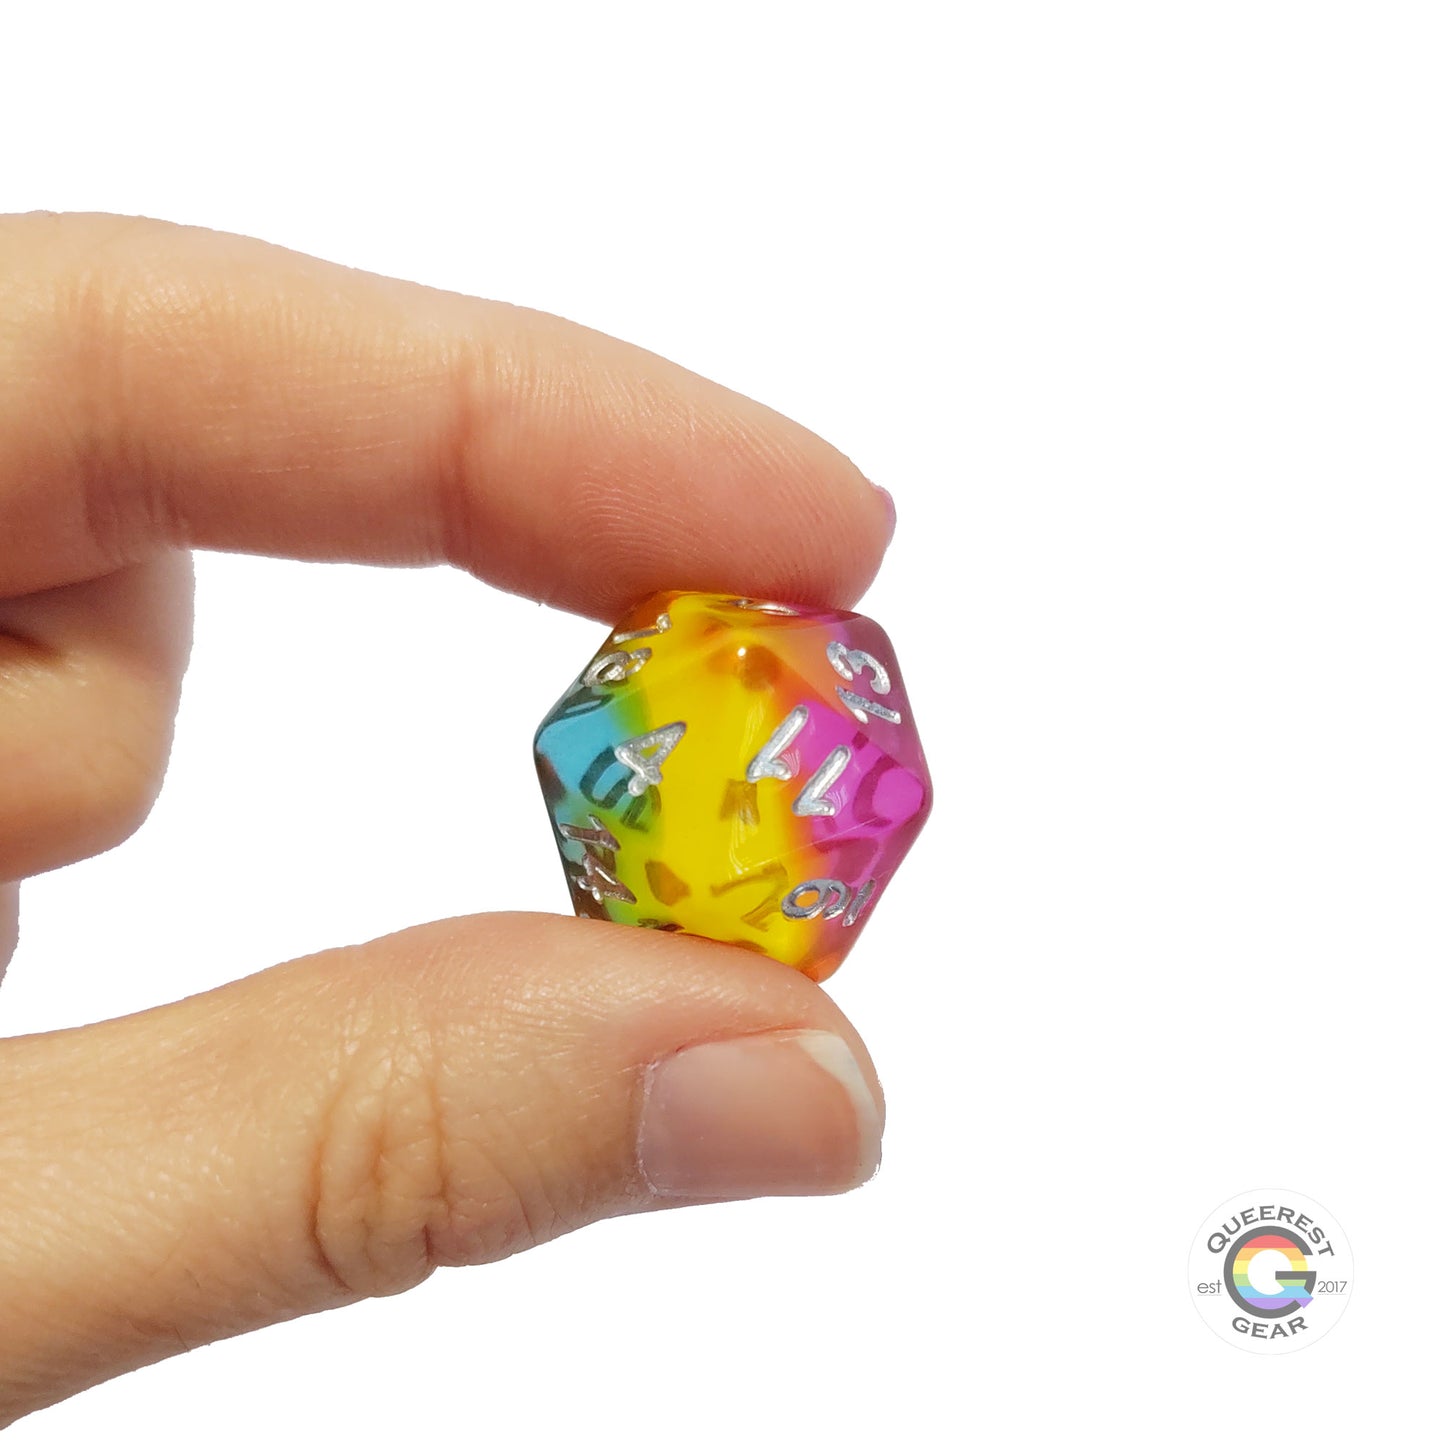 A hand holding up the pansexual  d20 to show off the color and transparency